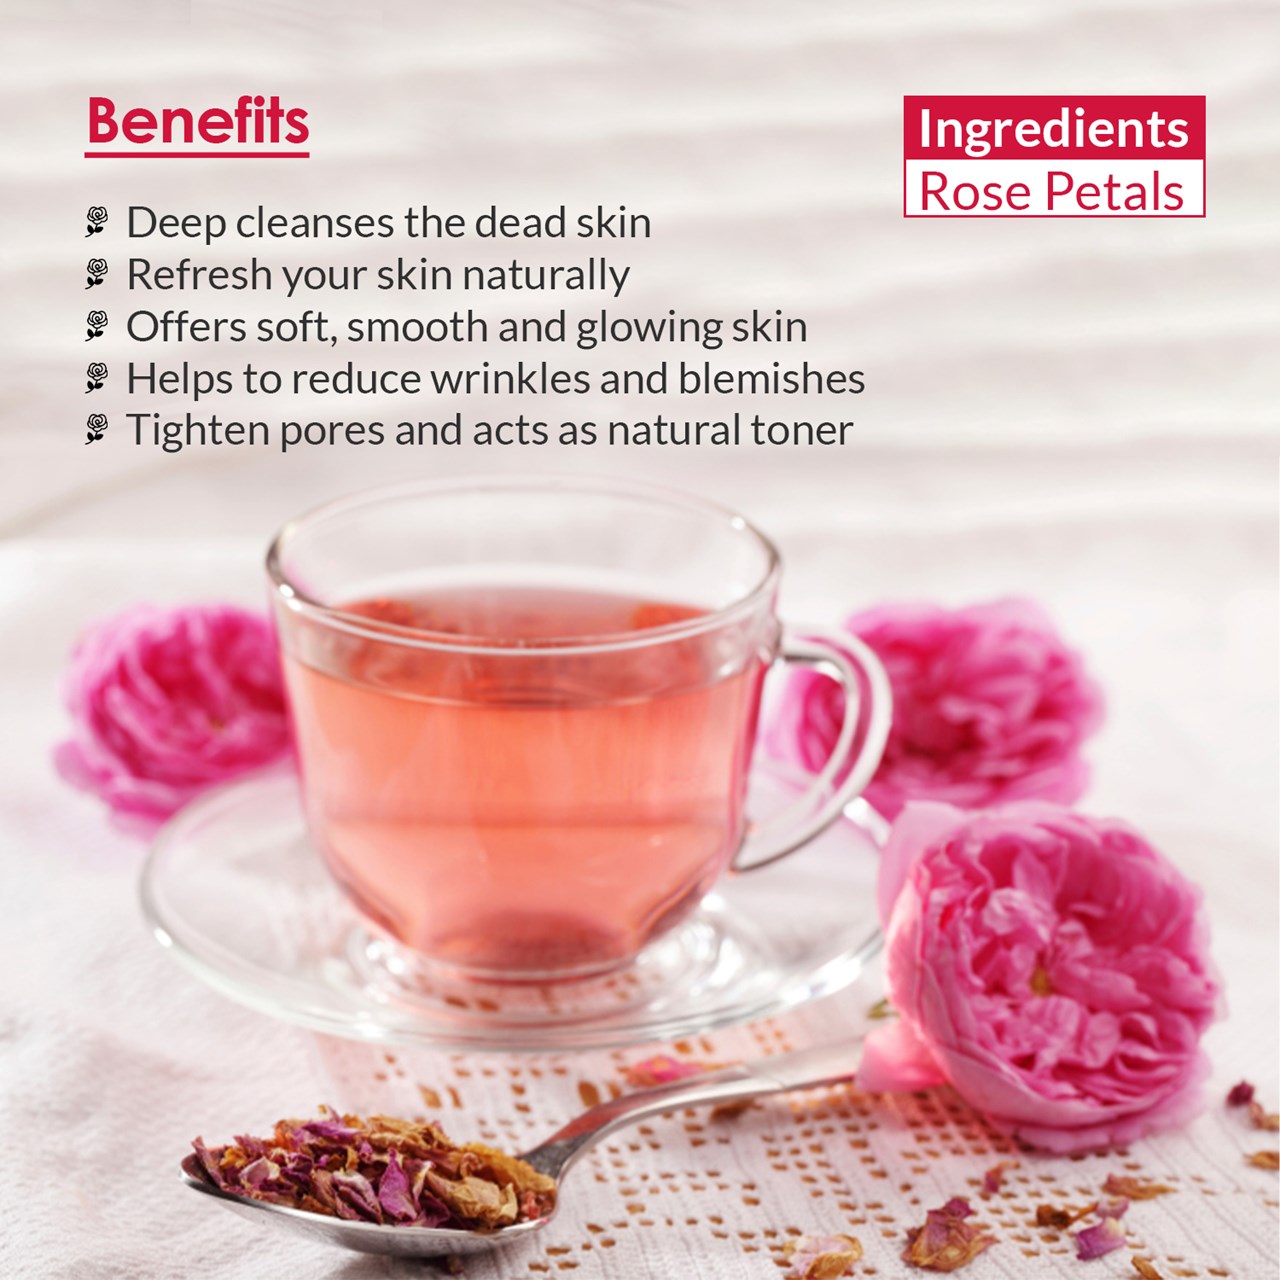 Picture of Vanalaya Rose Tea For Glowing Skin, Weight loss Made with 100% Natural Rose Petals - 30 gm